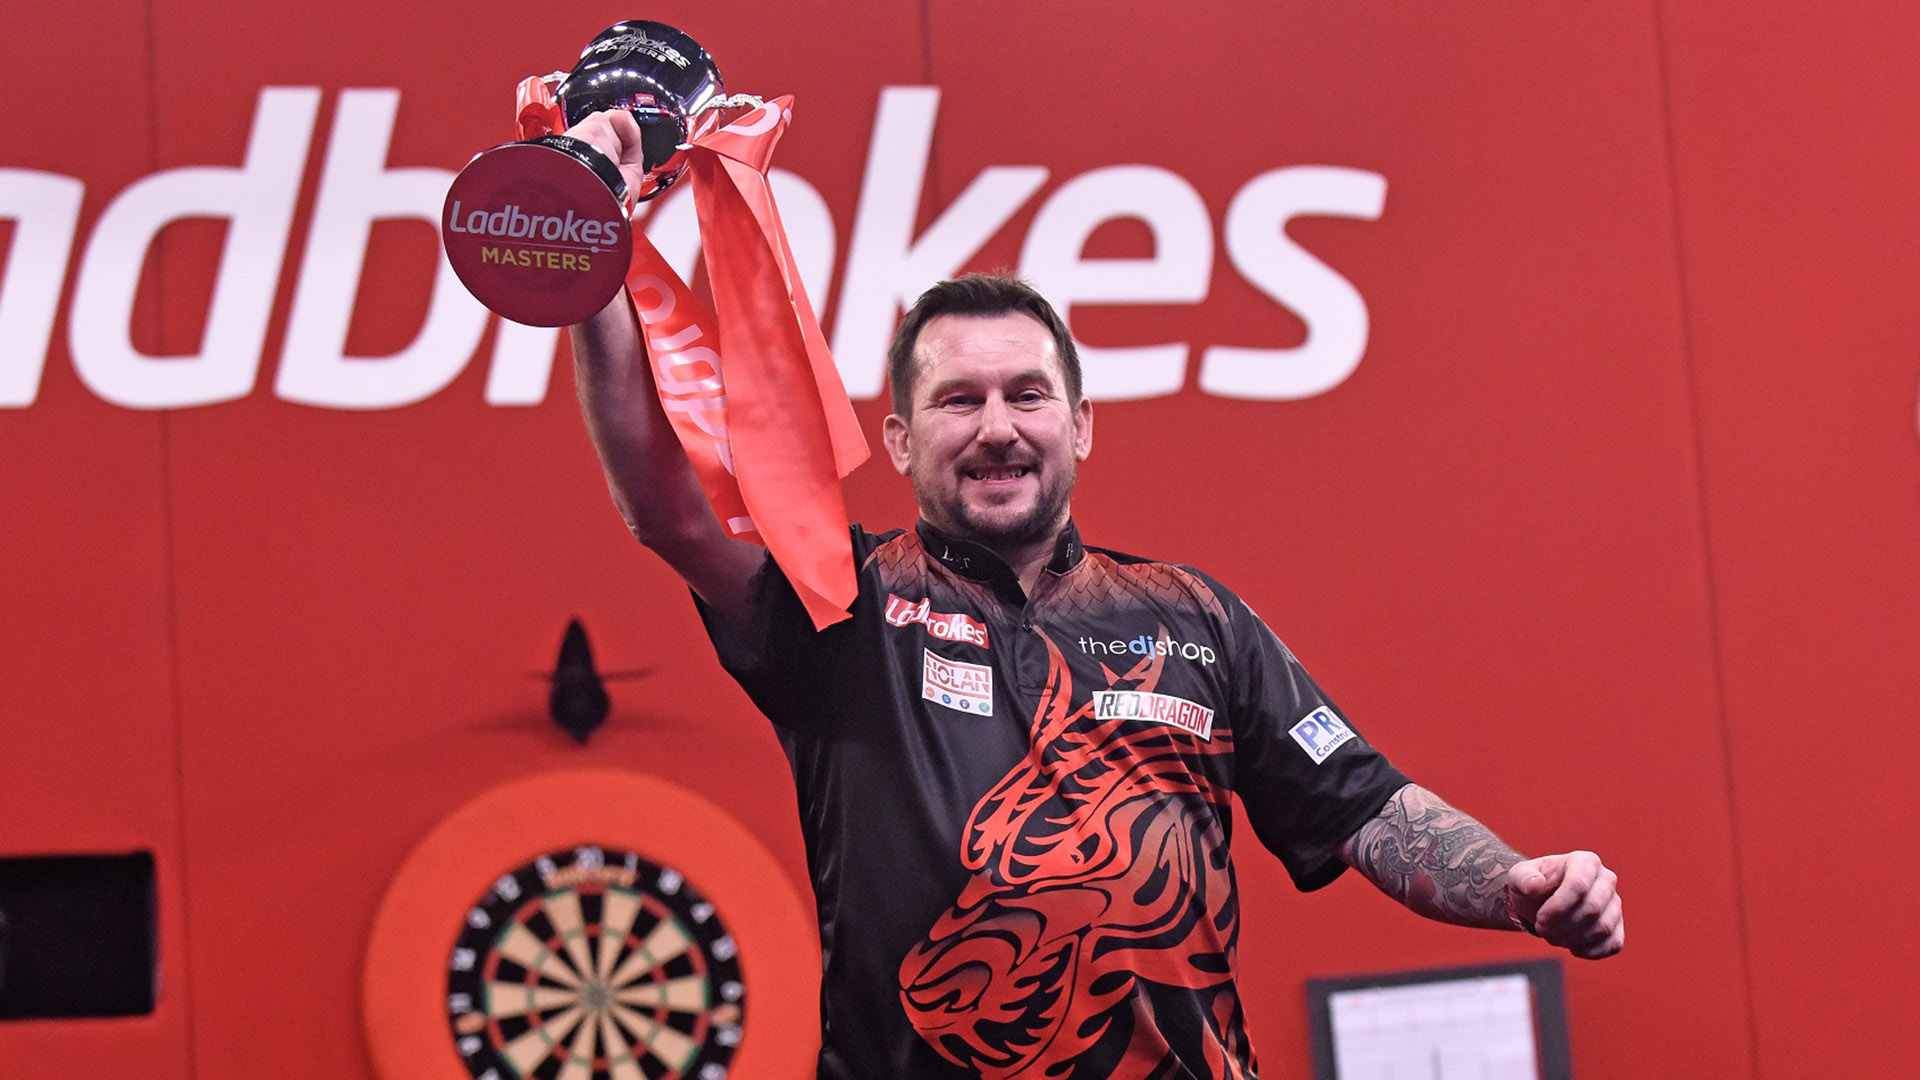 Darts results: Record-breaking Clayton wins Masters and takes the last Premier League spot